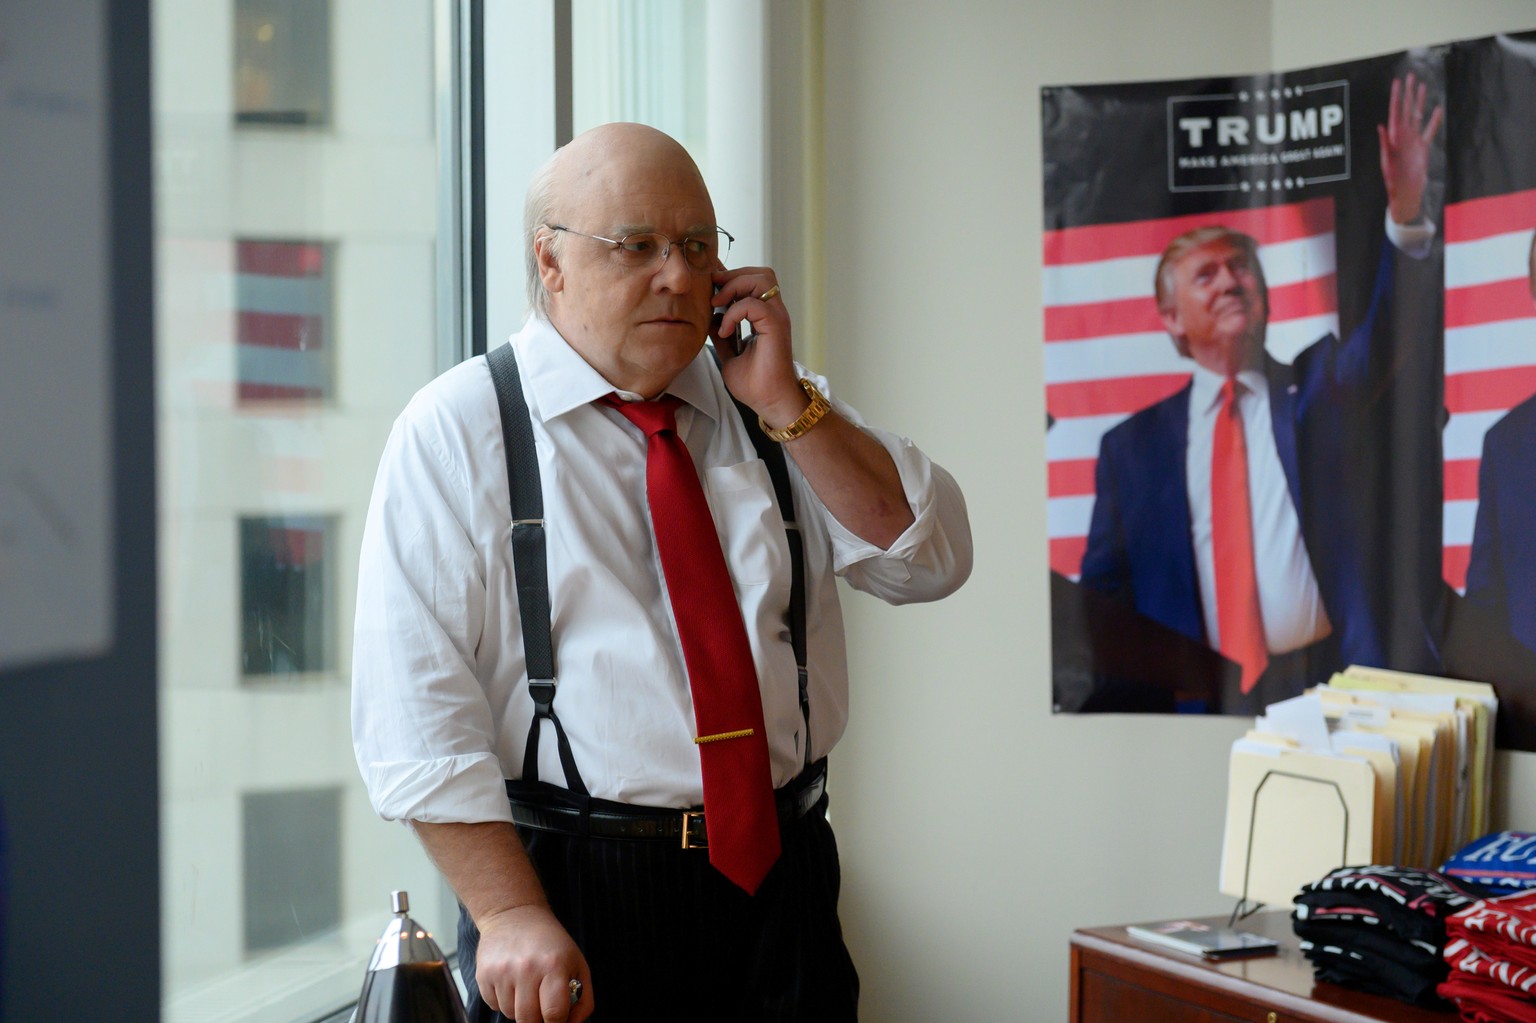 Russell Crowe as Roger Ailes in THE LOUDEST VOICE, Ò2016Ó. Photo Credit: JoJo Whilden/SHOWTIME.